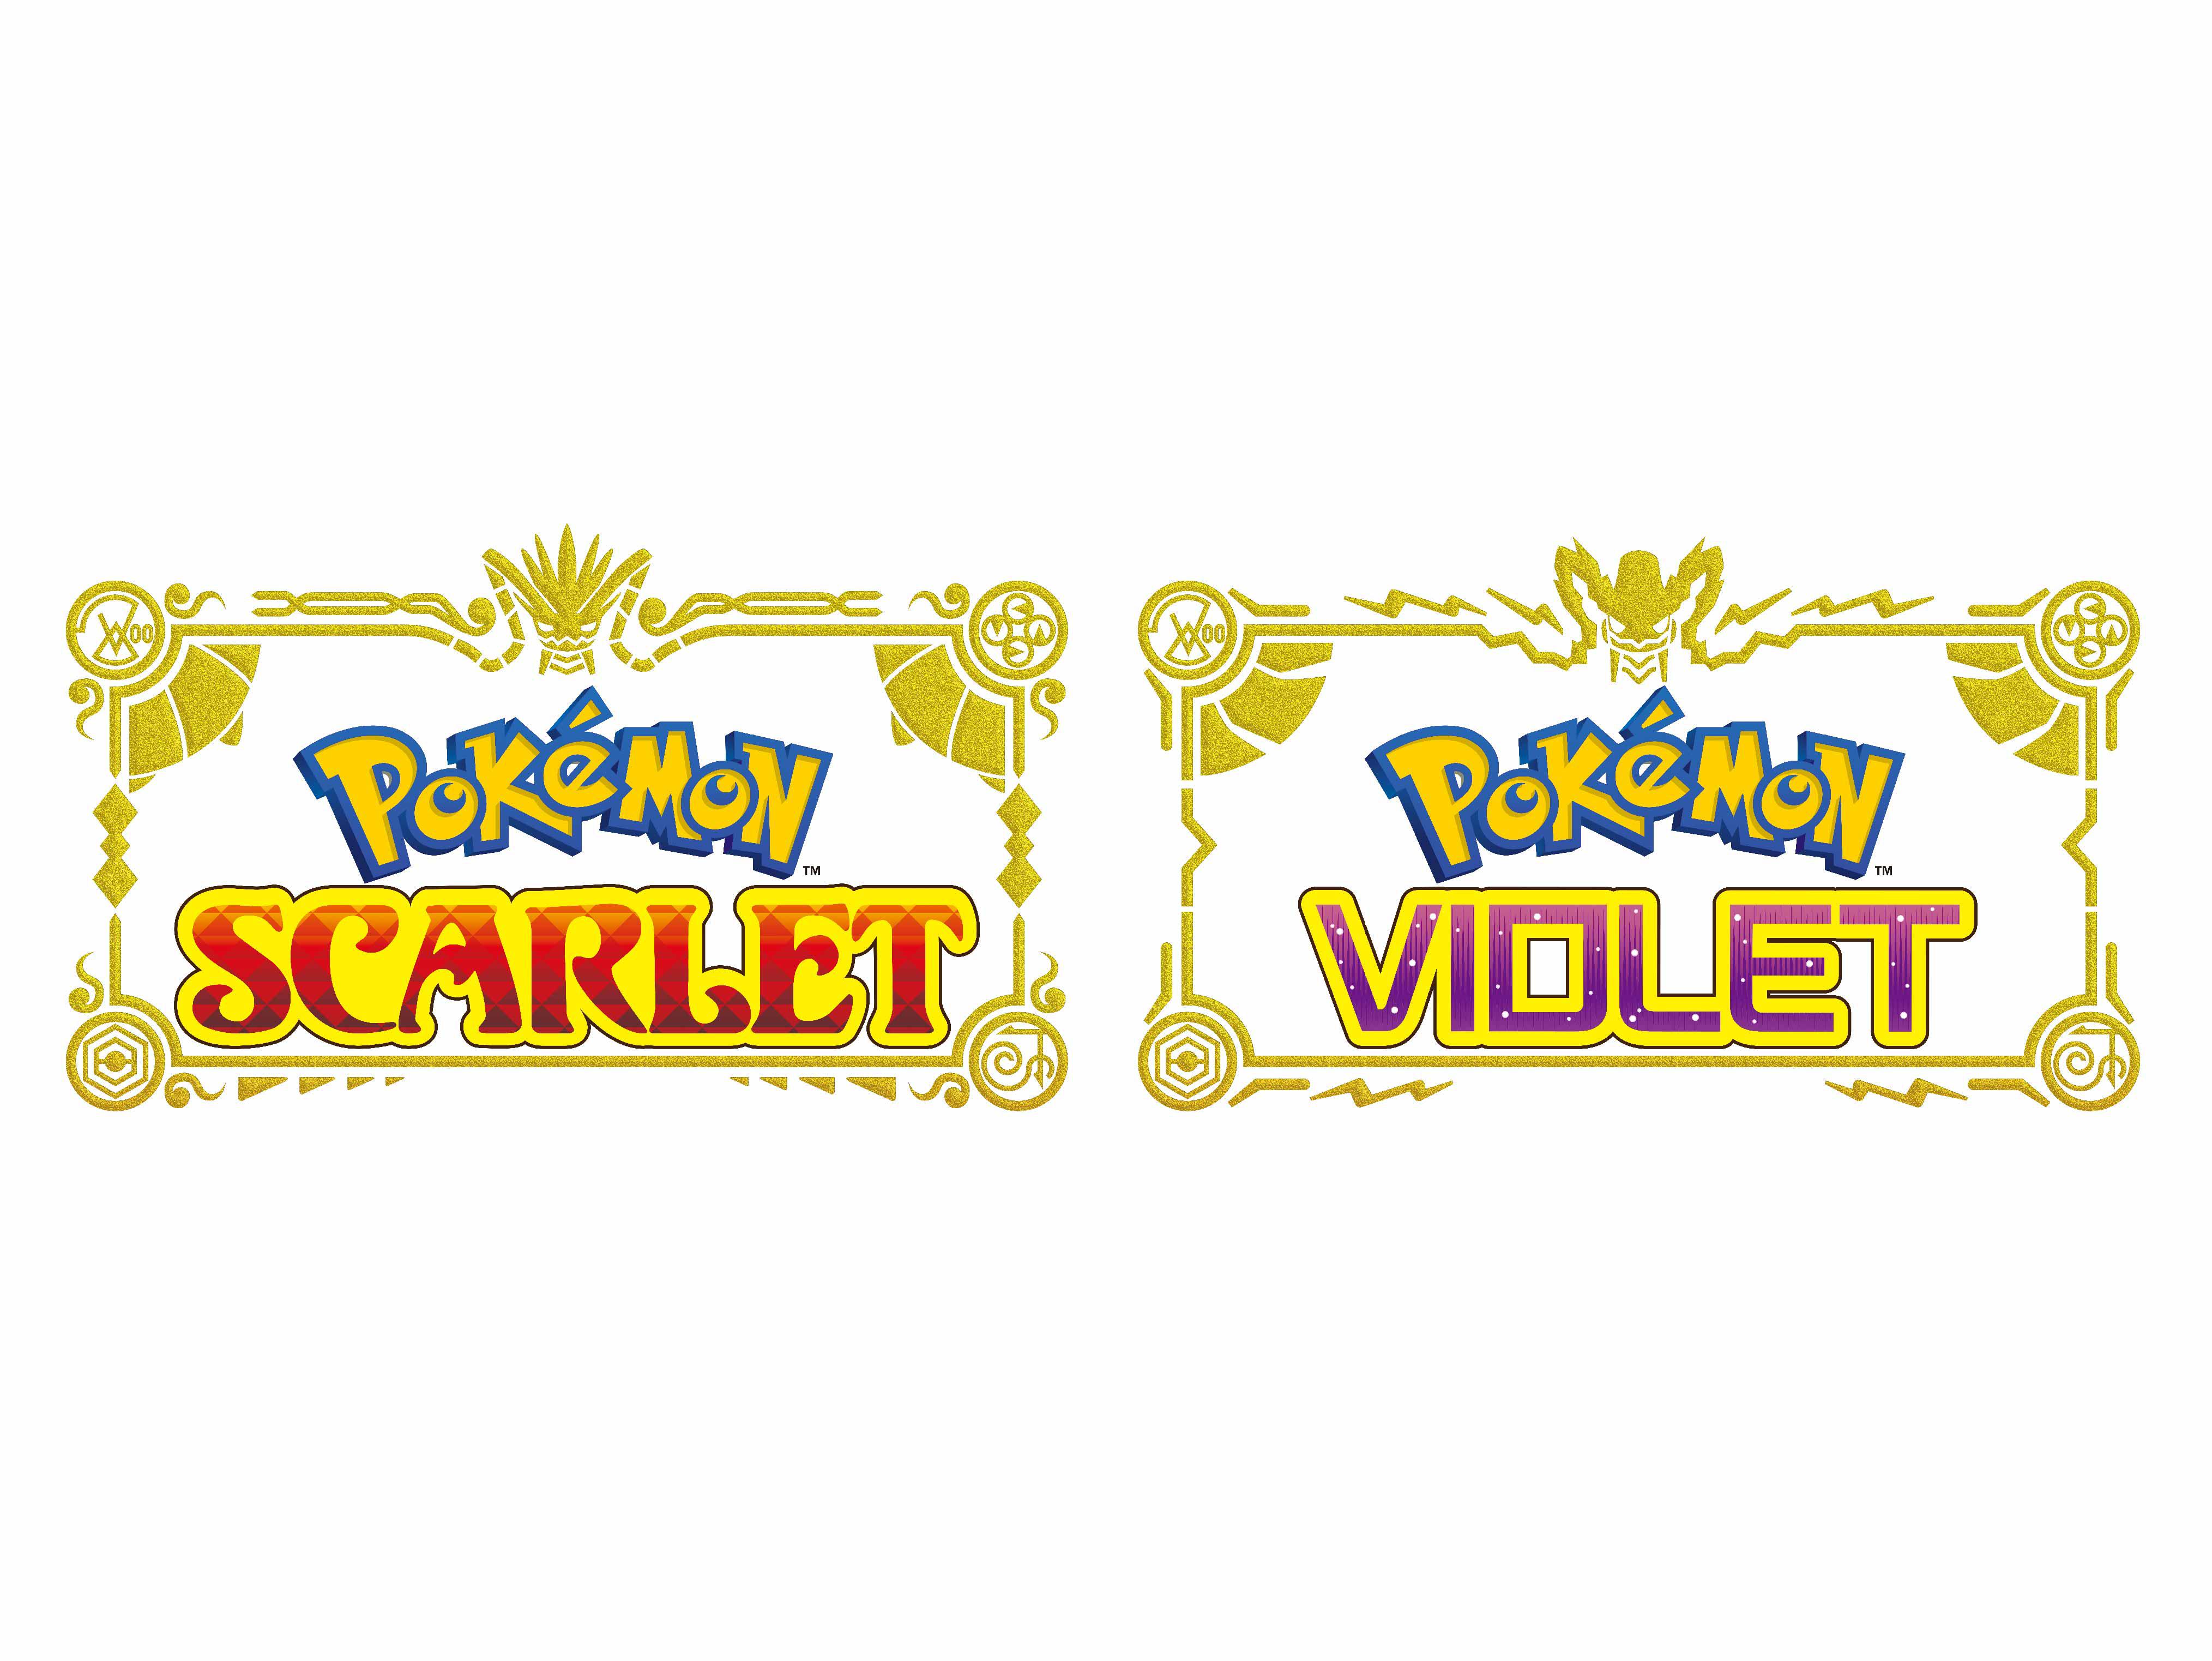 Part one of Pokemon Scarlet and Violet's DLC out September 13th